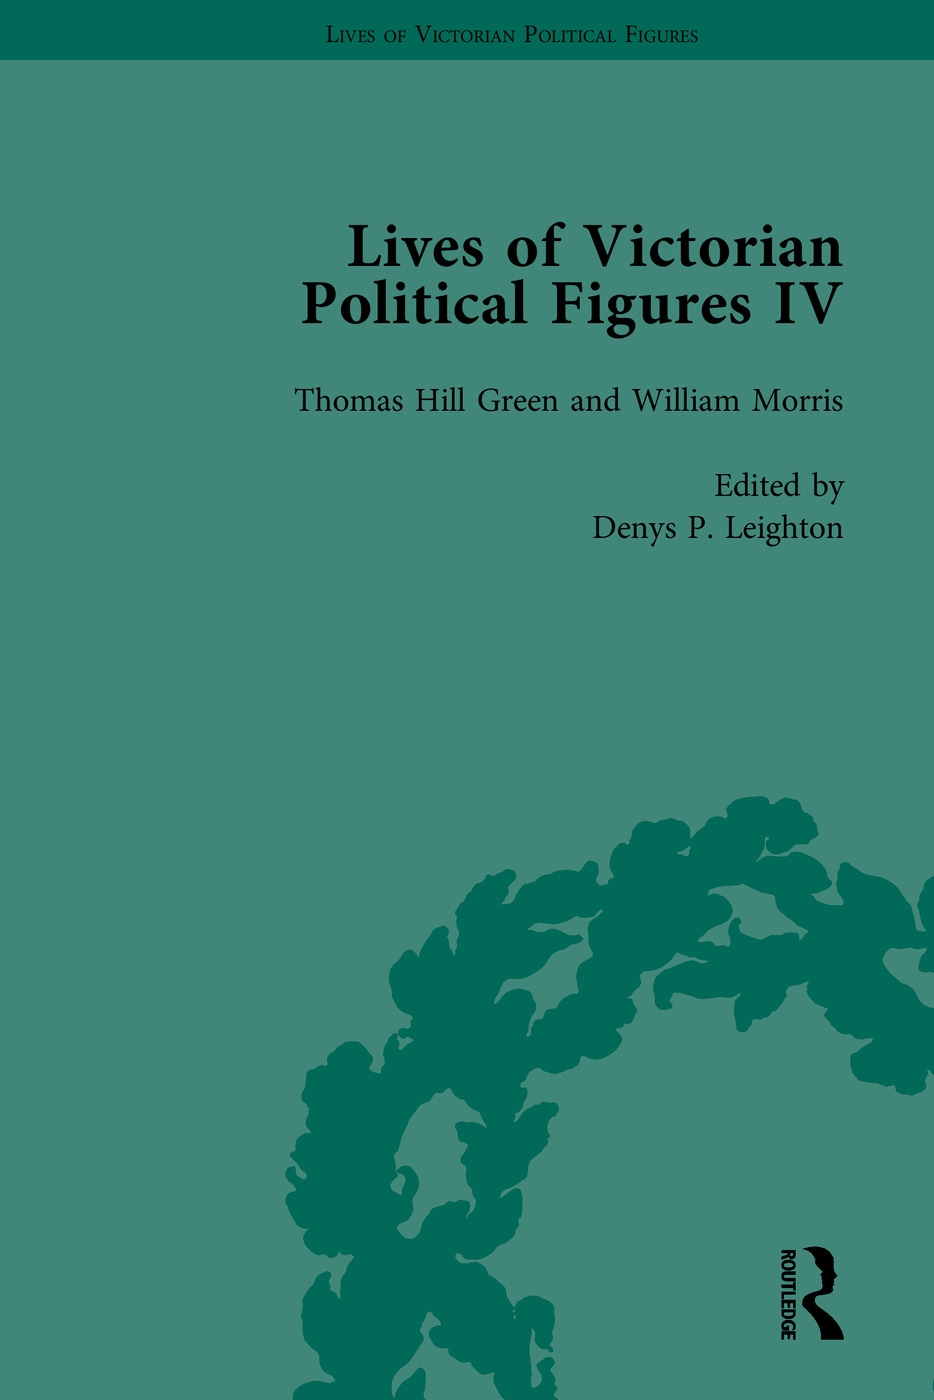 Lives of Victorian Political Figures, Part IV: John Stuart Mill, Thomas Hill Green, William Morris and Walter Bagehot by Their Contemporaries